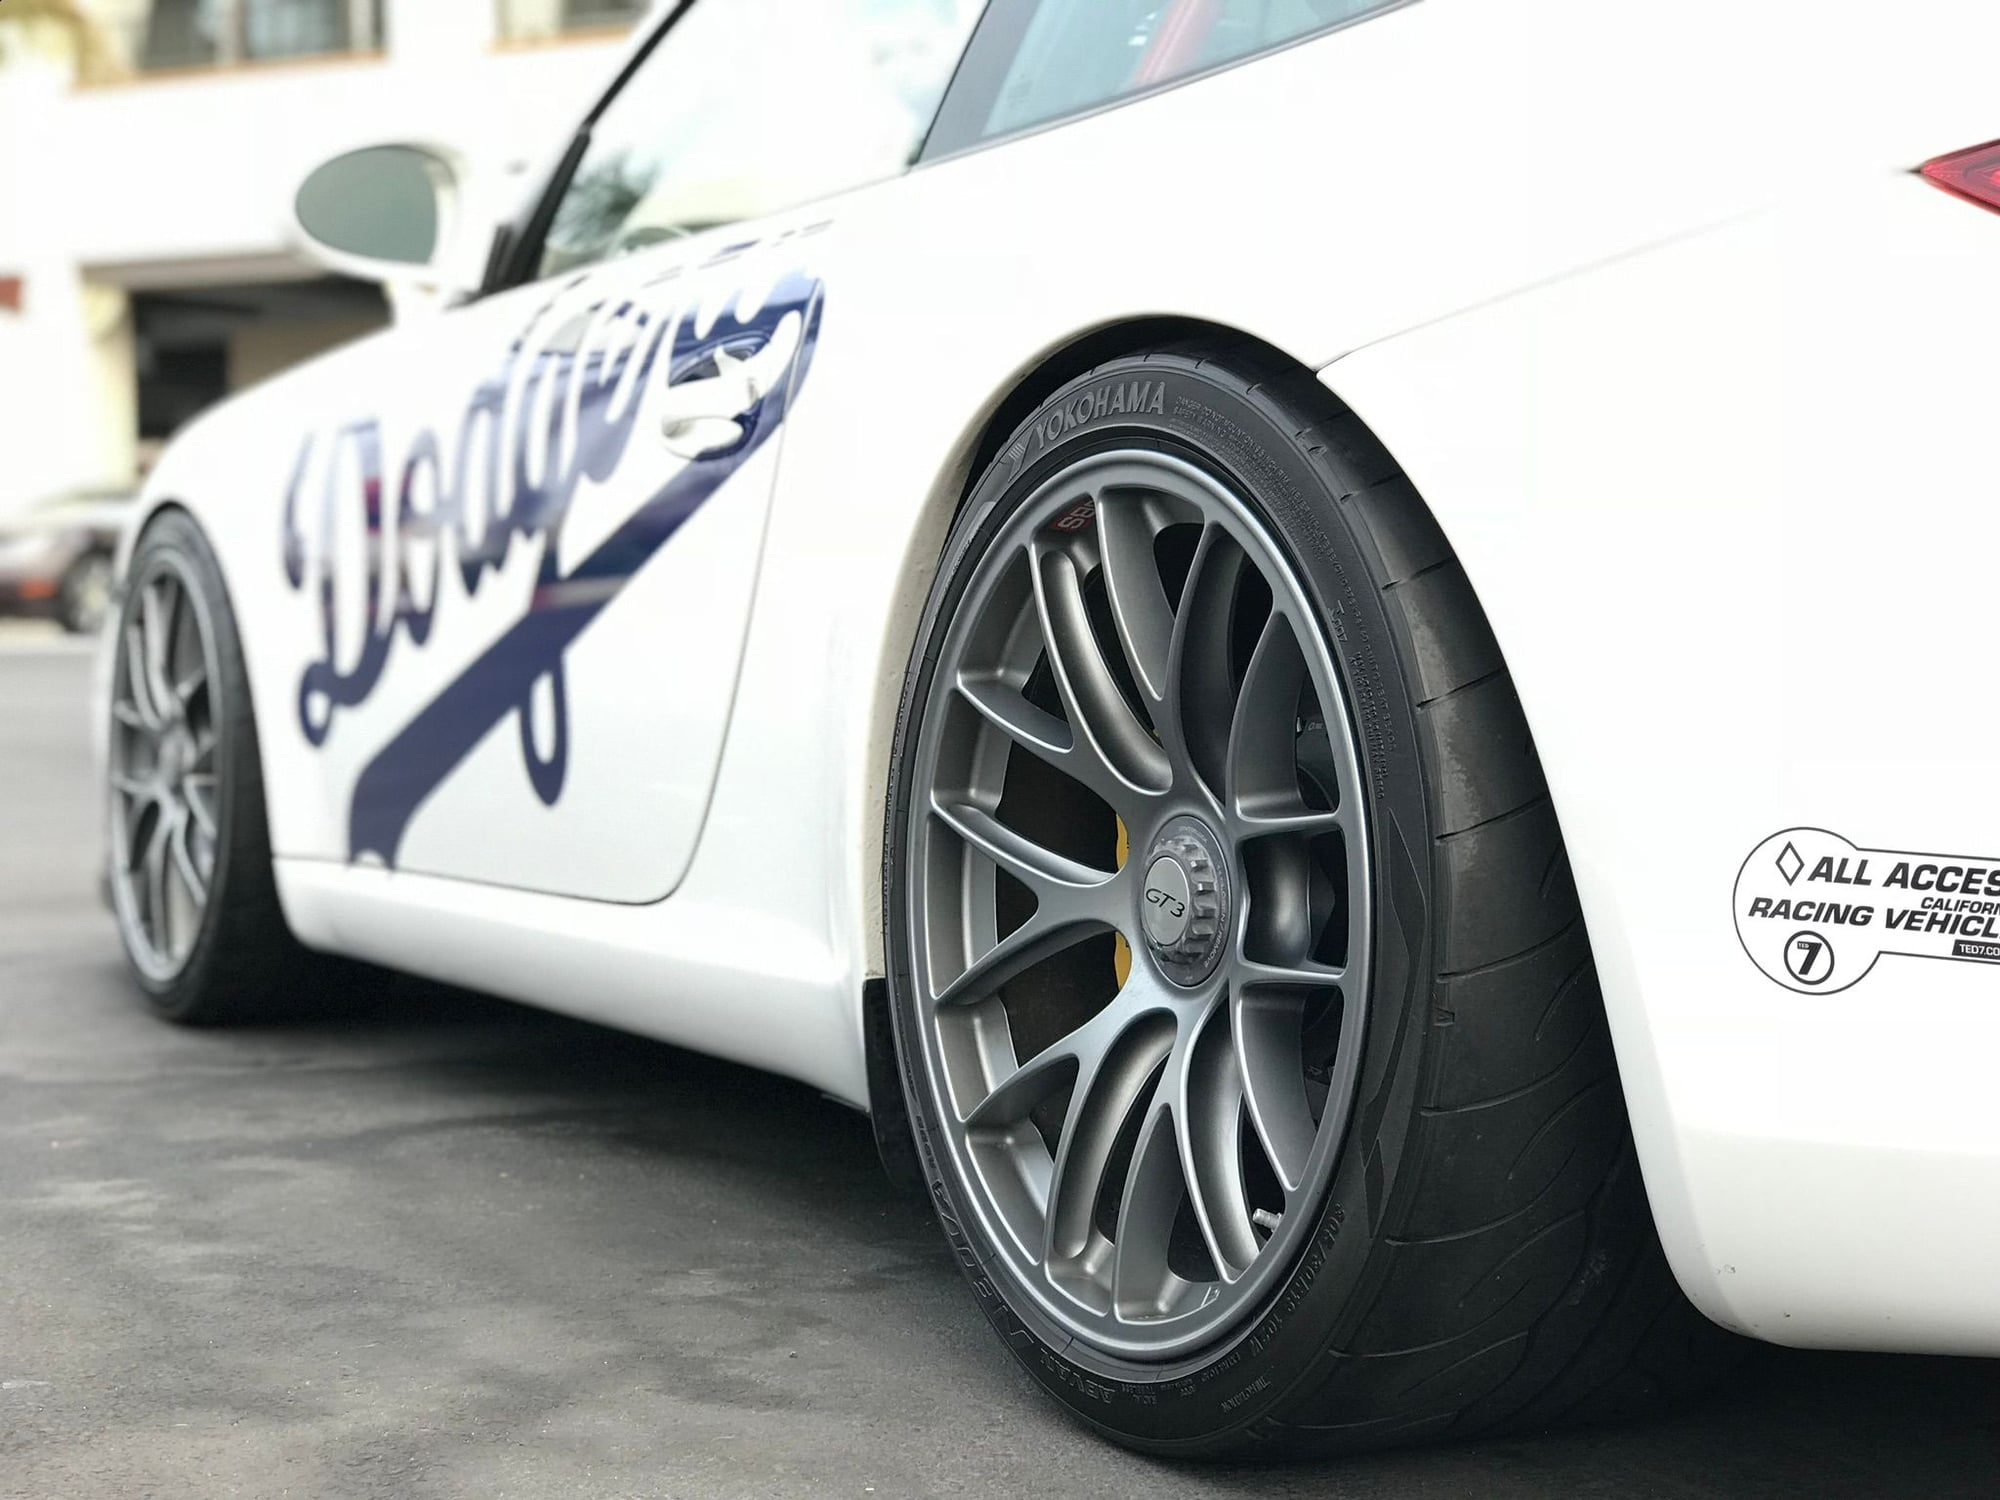 Wheels and Tires/Axles - 19" Forged BBS Monoblock Racing Wheels - Centerlock - Used - 2010 to 2011 Porsche 911 - Rancho Mission Viejo, CA 92694, United States